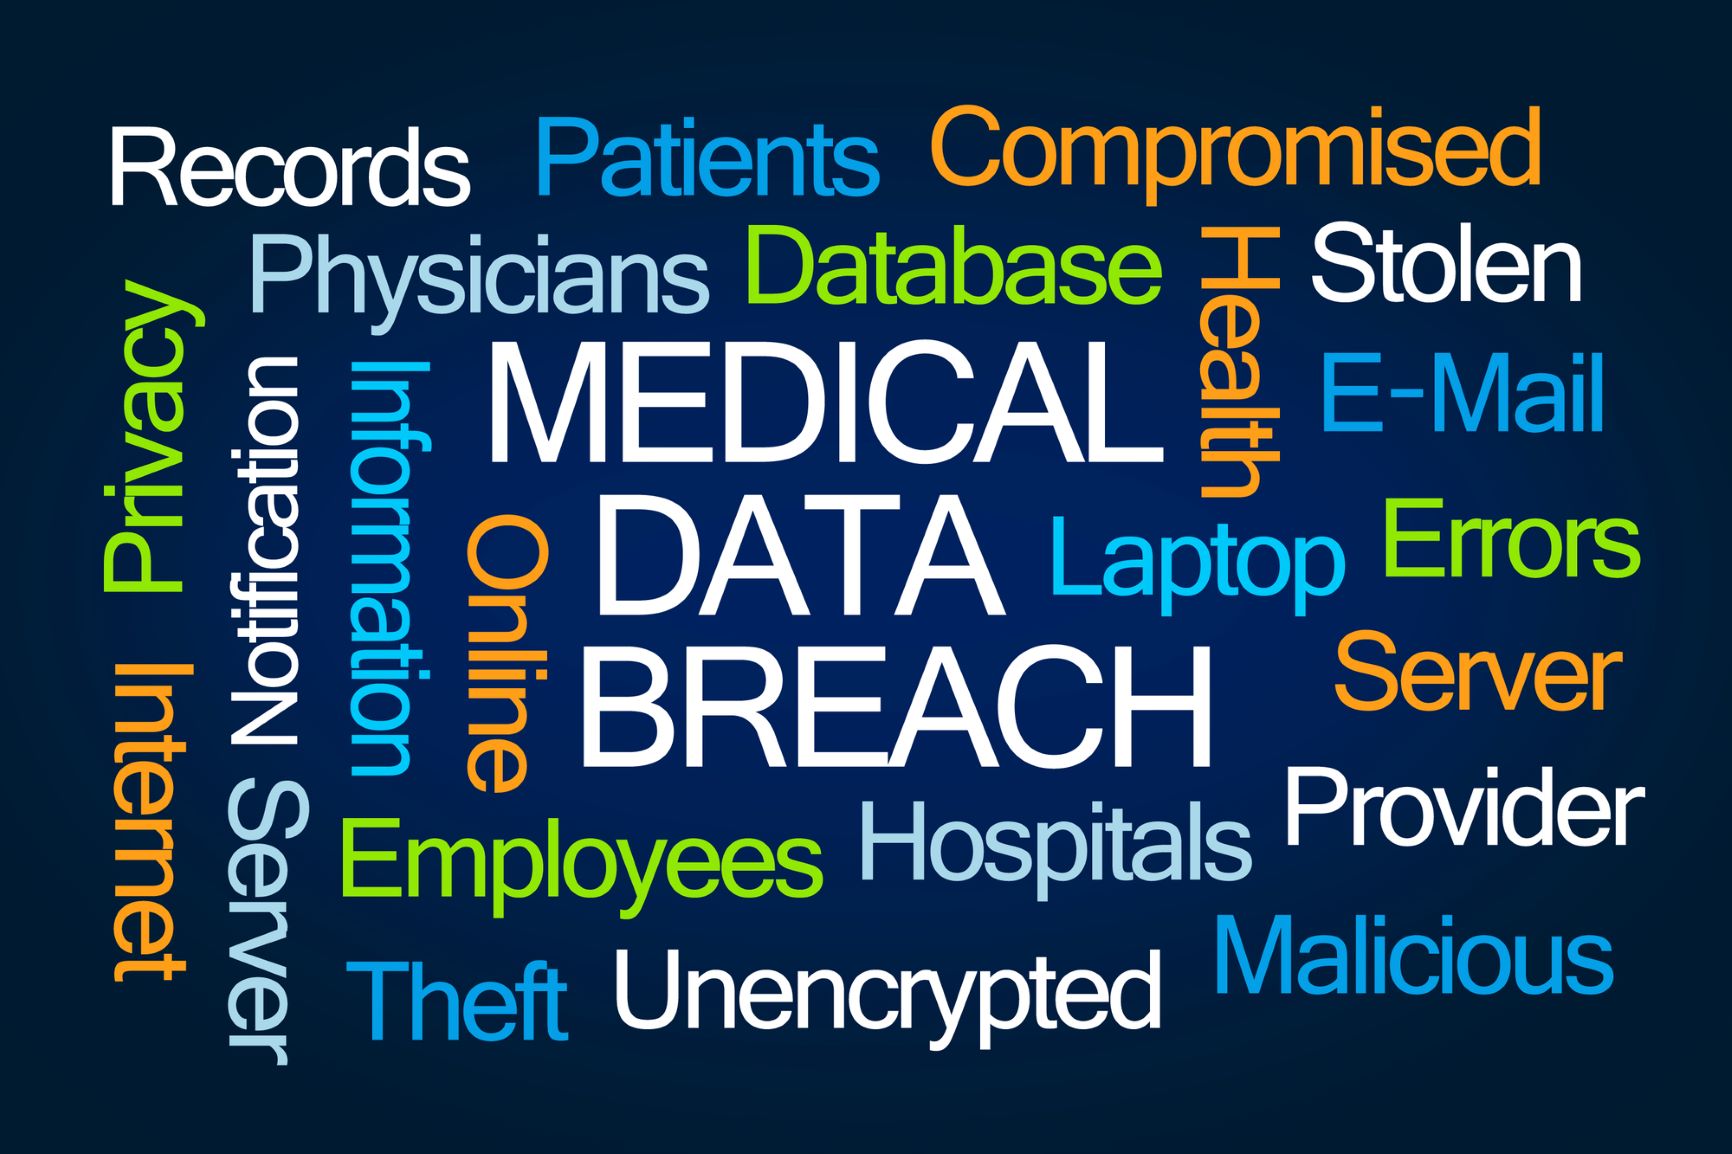 Healthcare Company is Released From Operation-Stalling Cryptolocker with Solutions Provided by Thrive’s Top-Tier Cybersecurity Forensic Analysts.